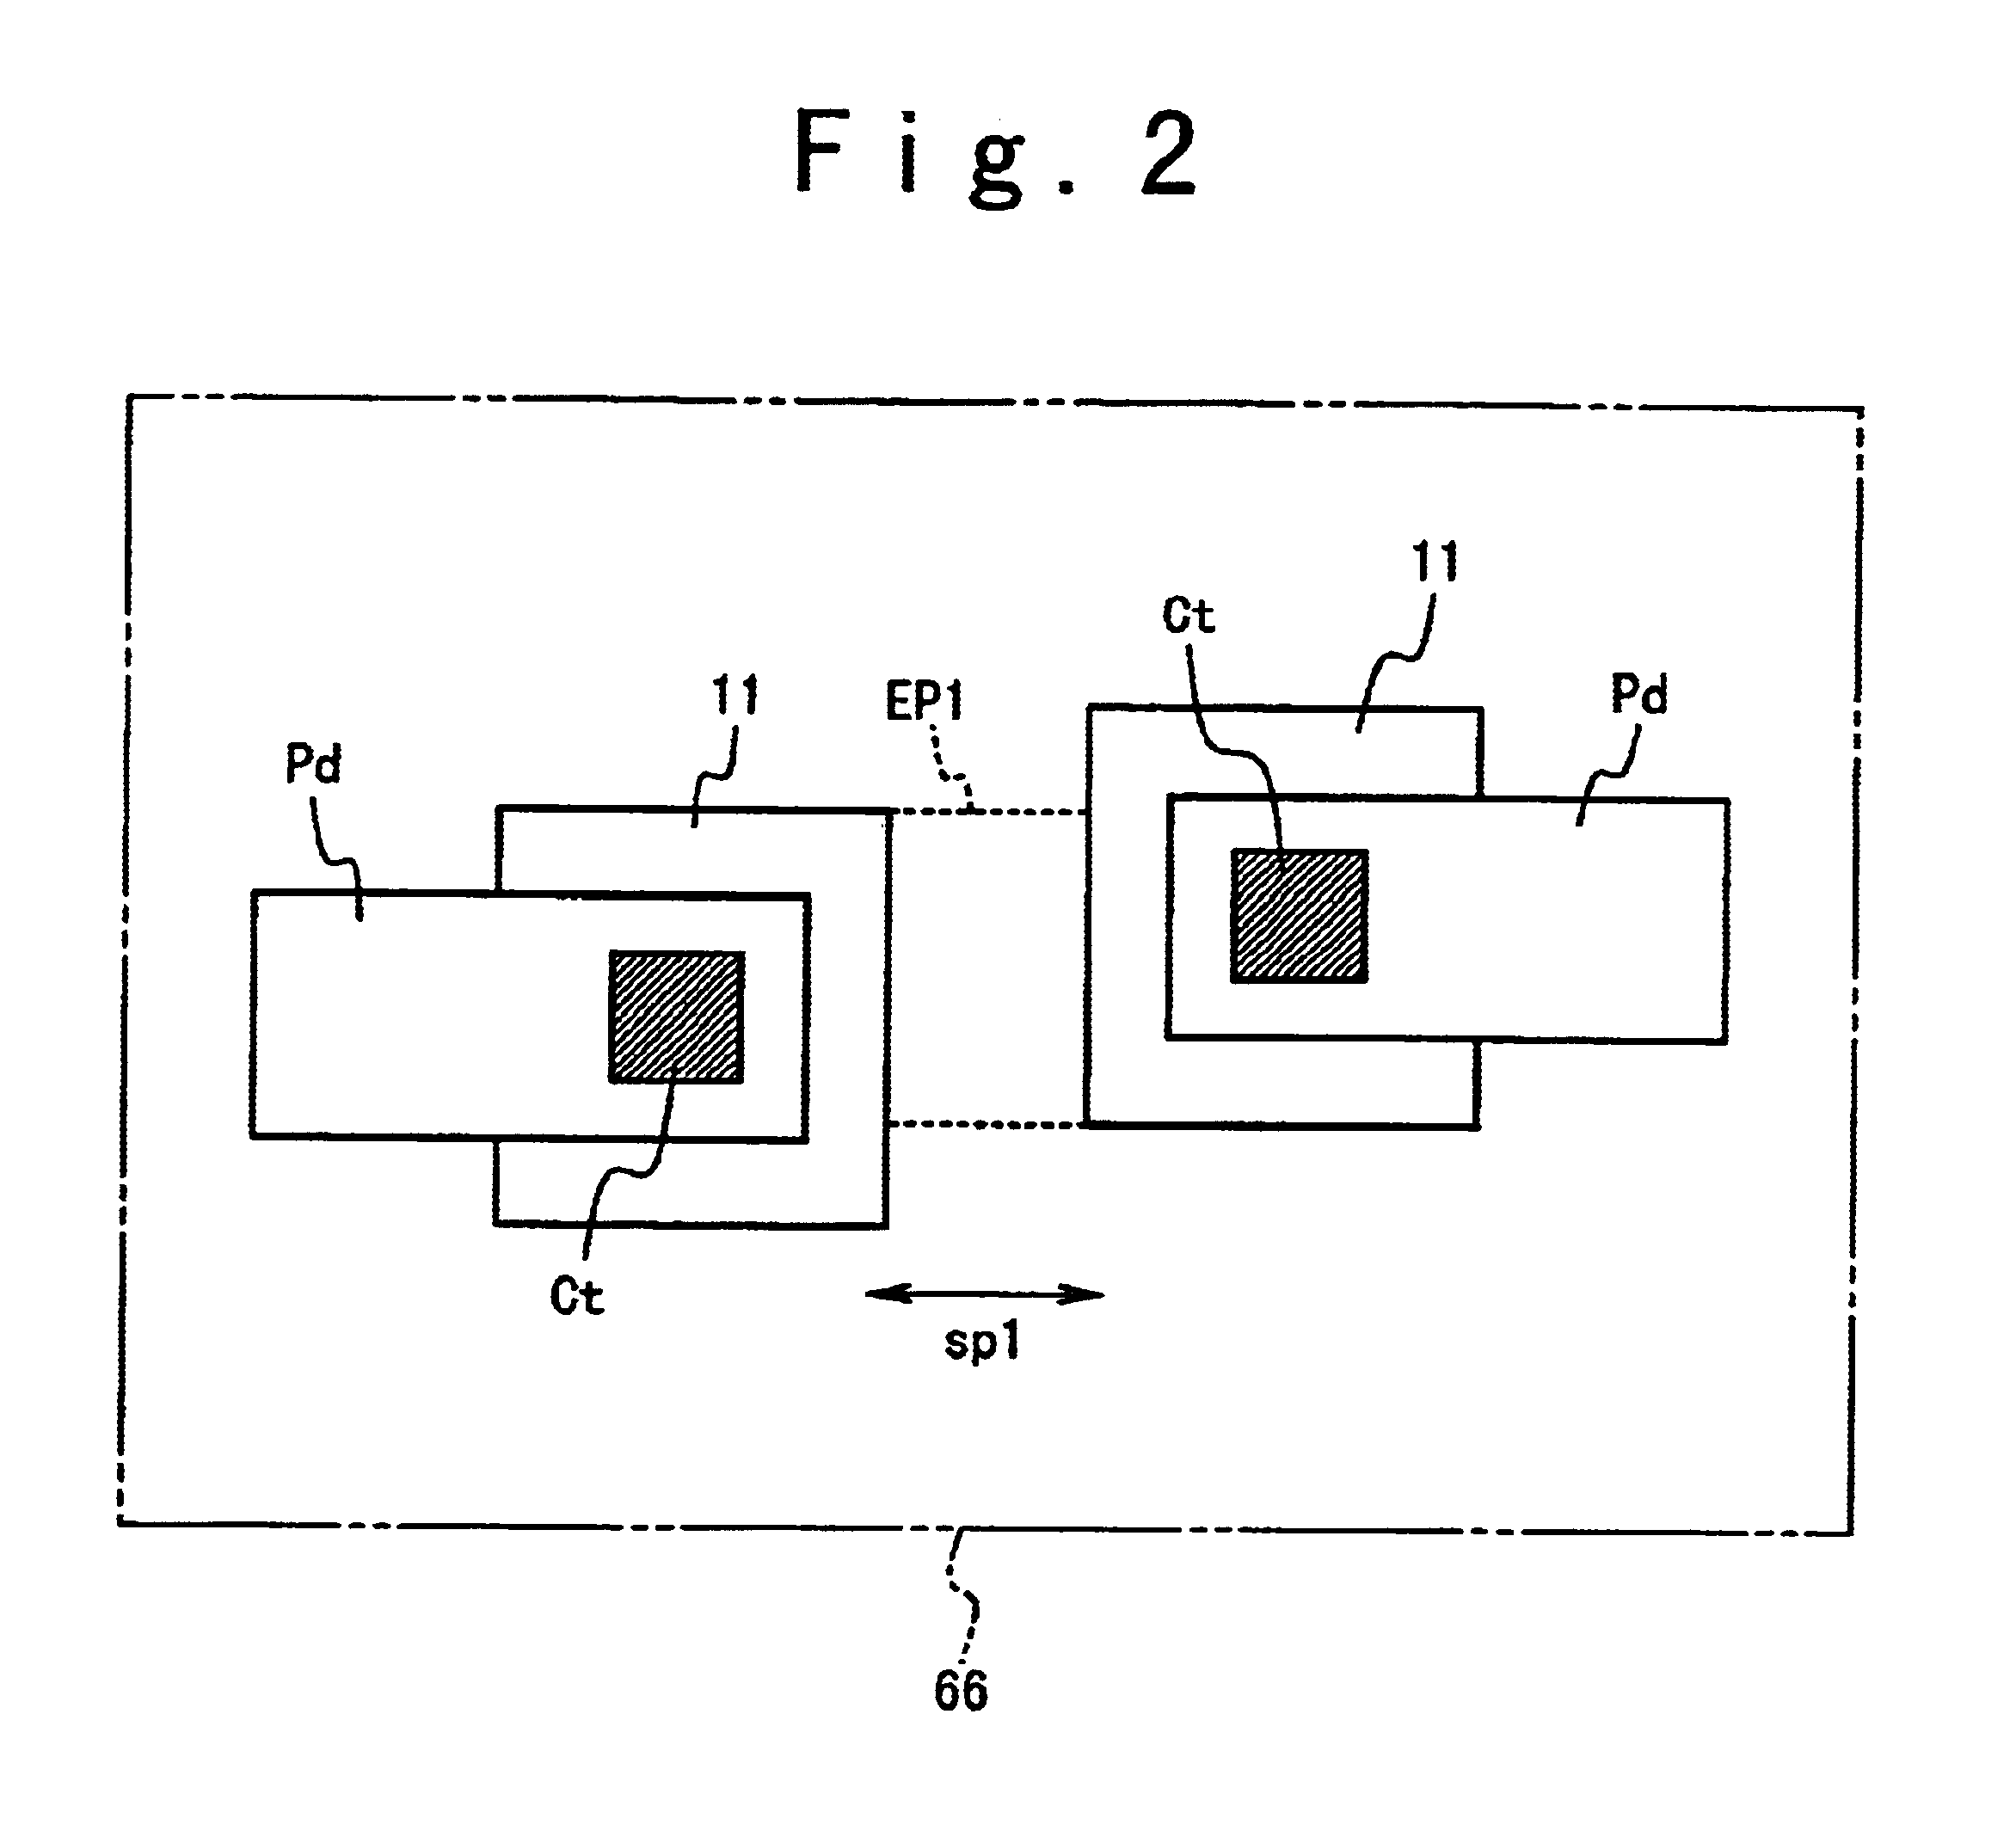 Optical proximity effect correcting method and mask data forming method in semiconductor manufacturing process, which can sufficiently correct optical proximity effect, even under various situations with regard to size and shape of design pattern, and space width and position relation between design patterns